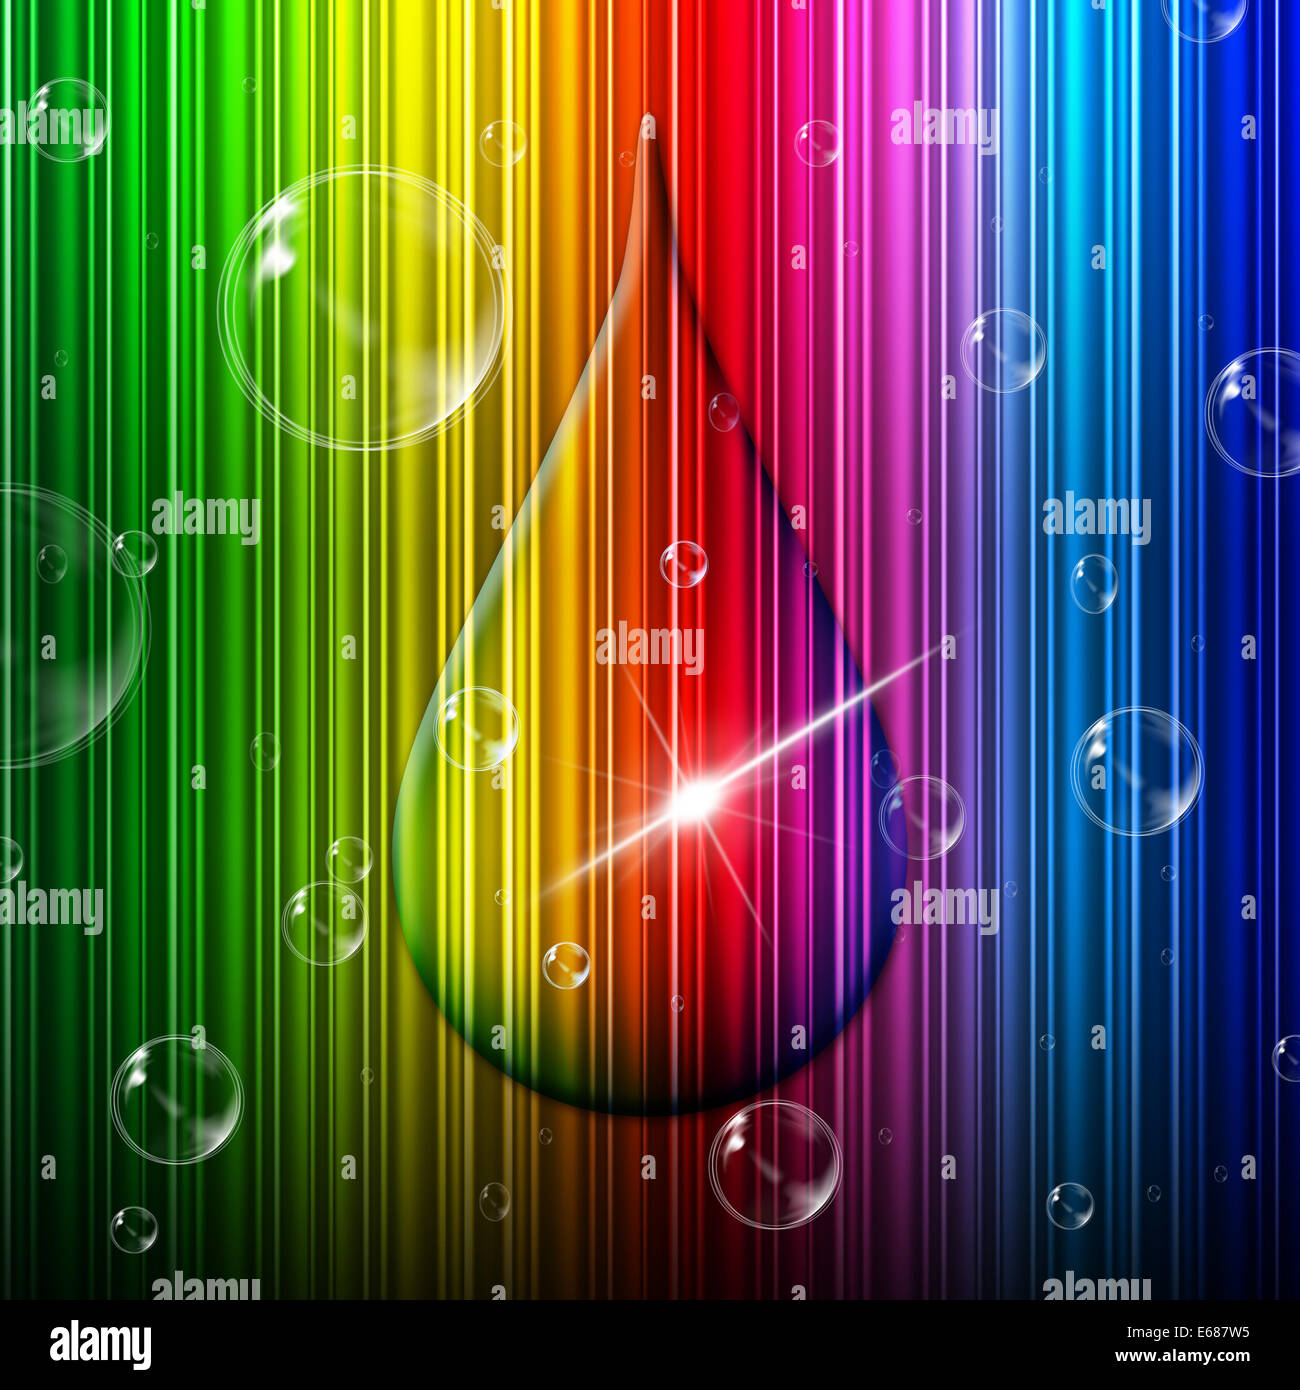 Rain Drop Meaning Colorful Background And Multicoloured Stock Photo - Alamy